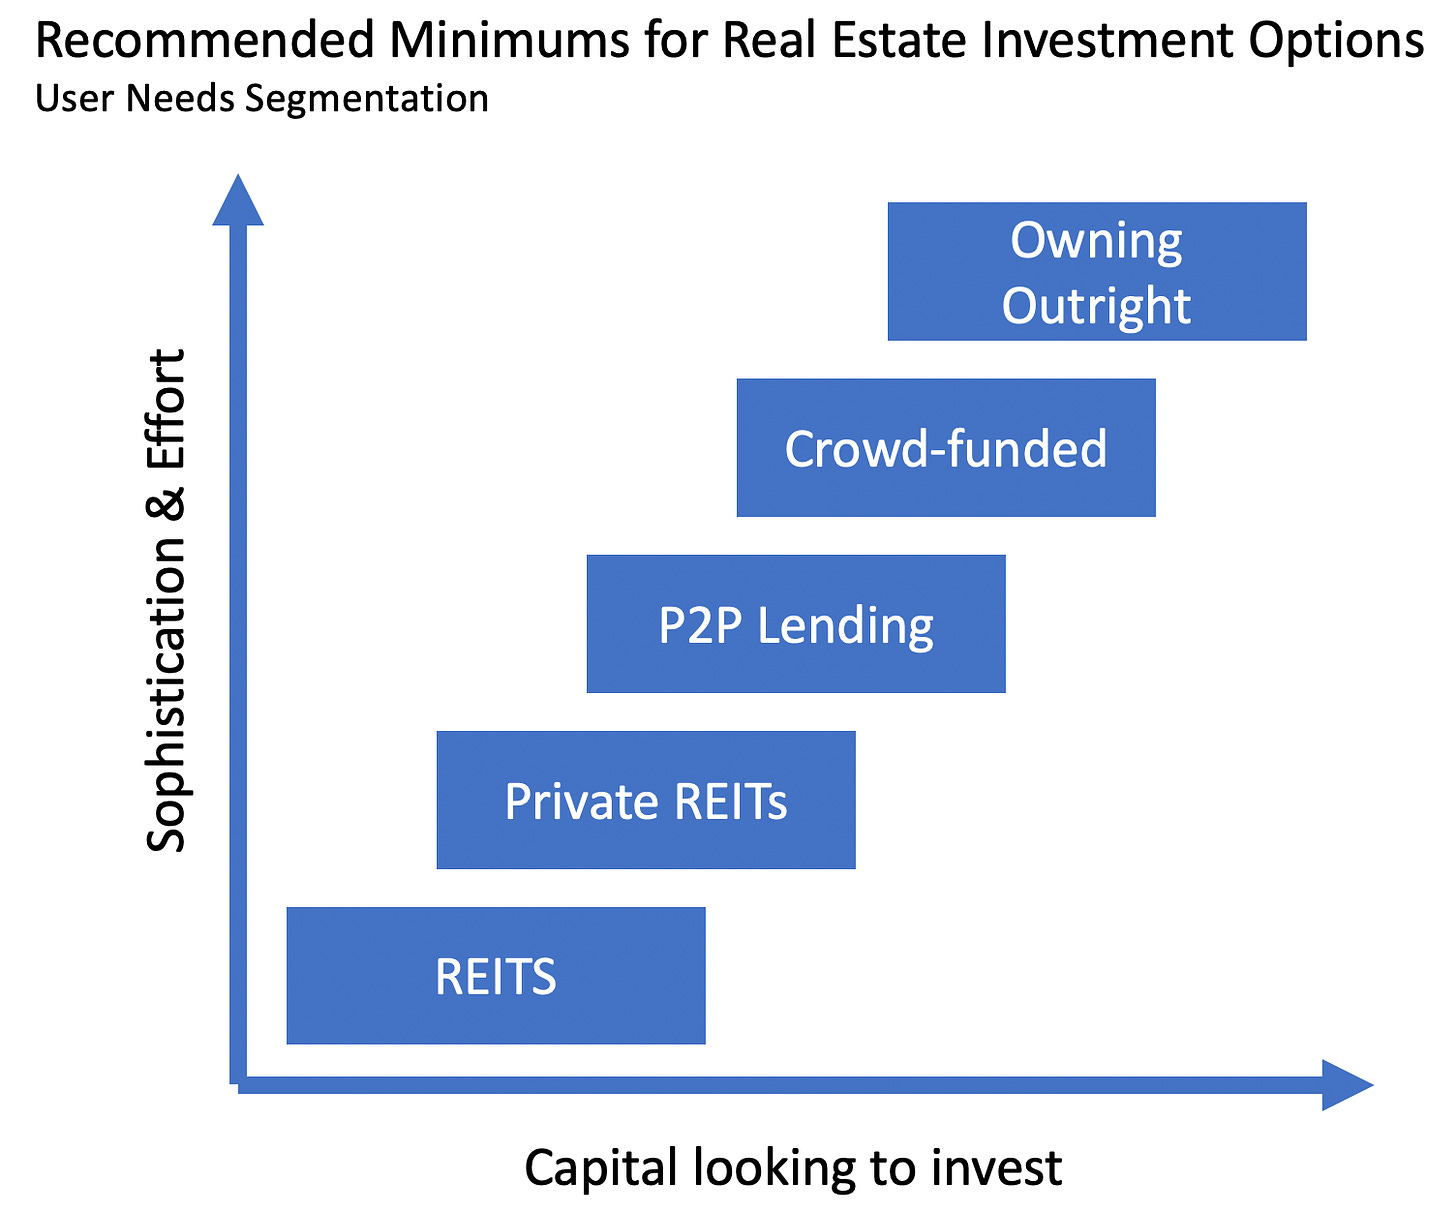 Recommended Minimums for Real Estate Investment Options User Needs Segmentation